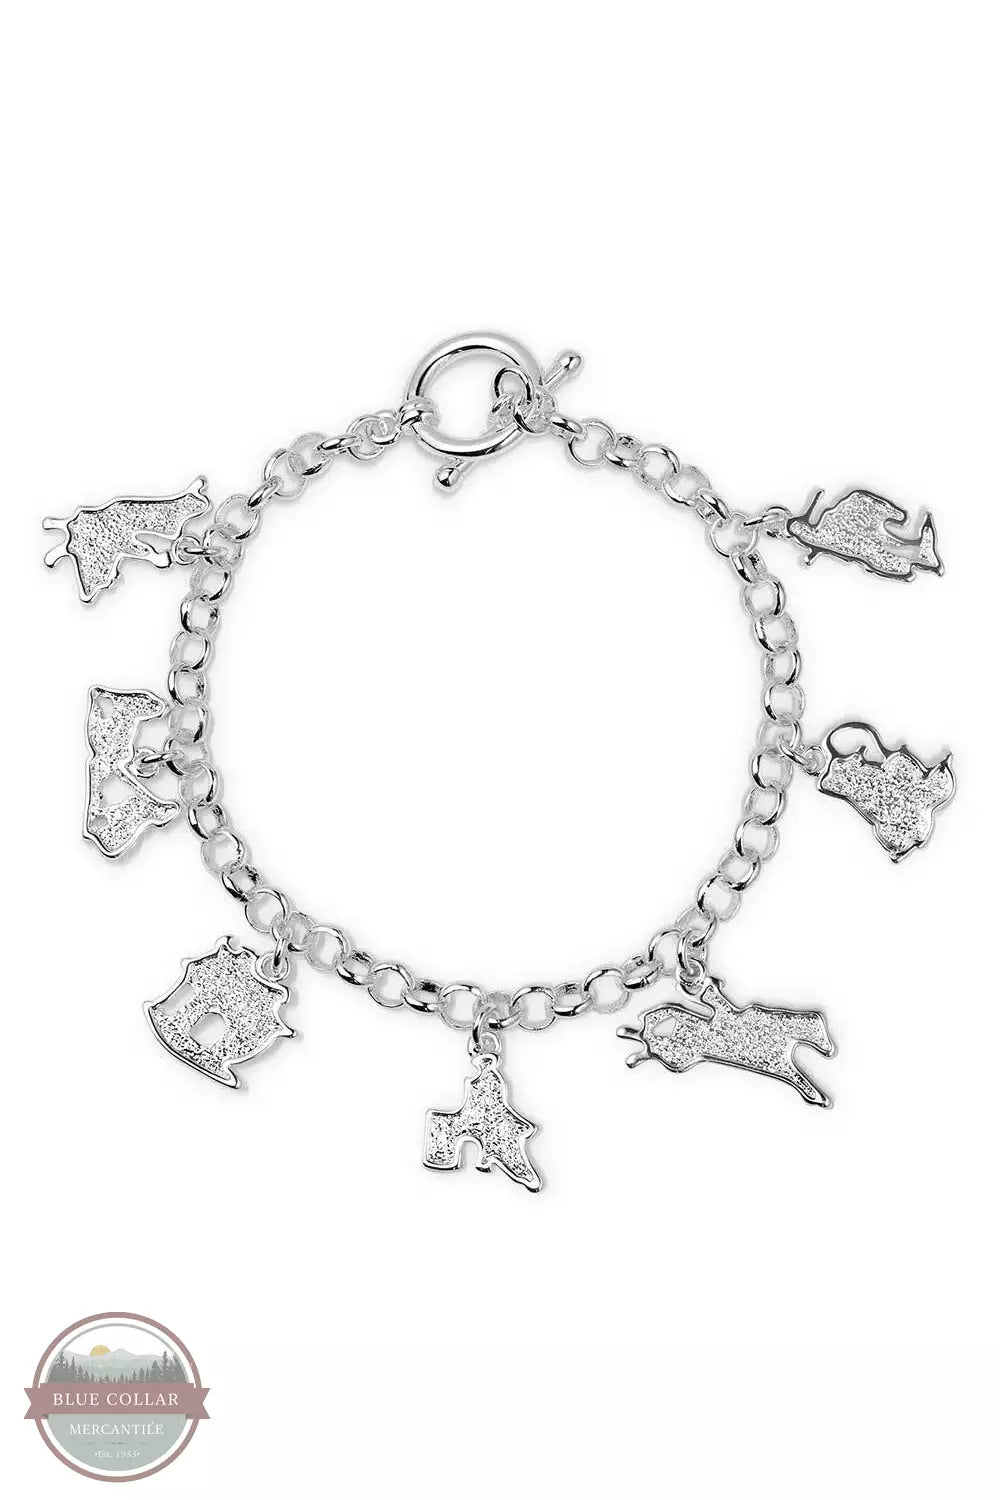 Montana Silversmiths BC5767 Charms of Champions Rodeo Bracelet Underside View